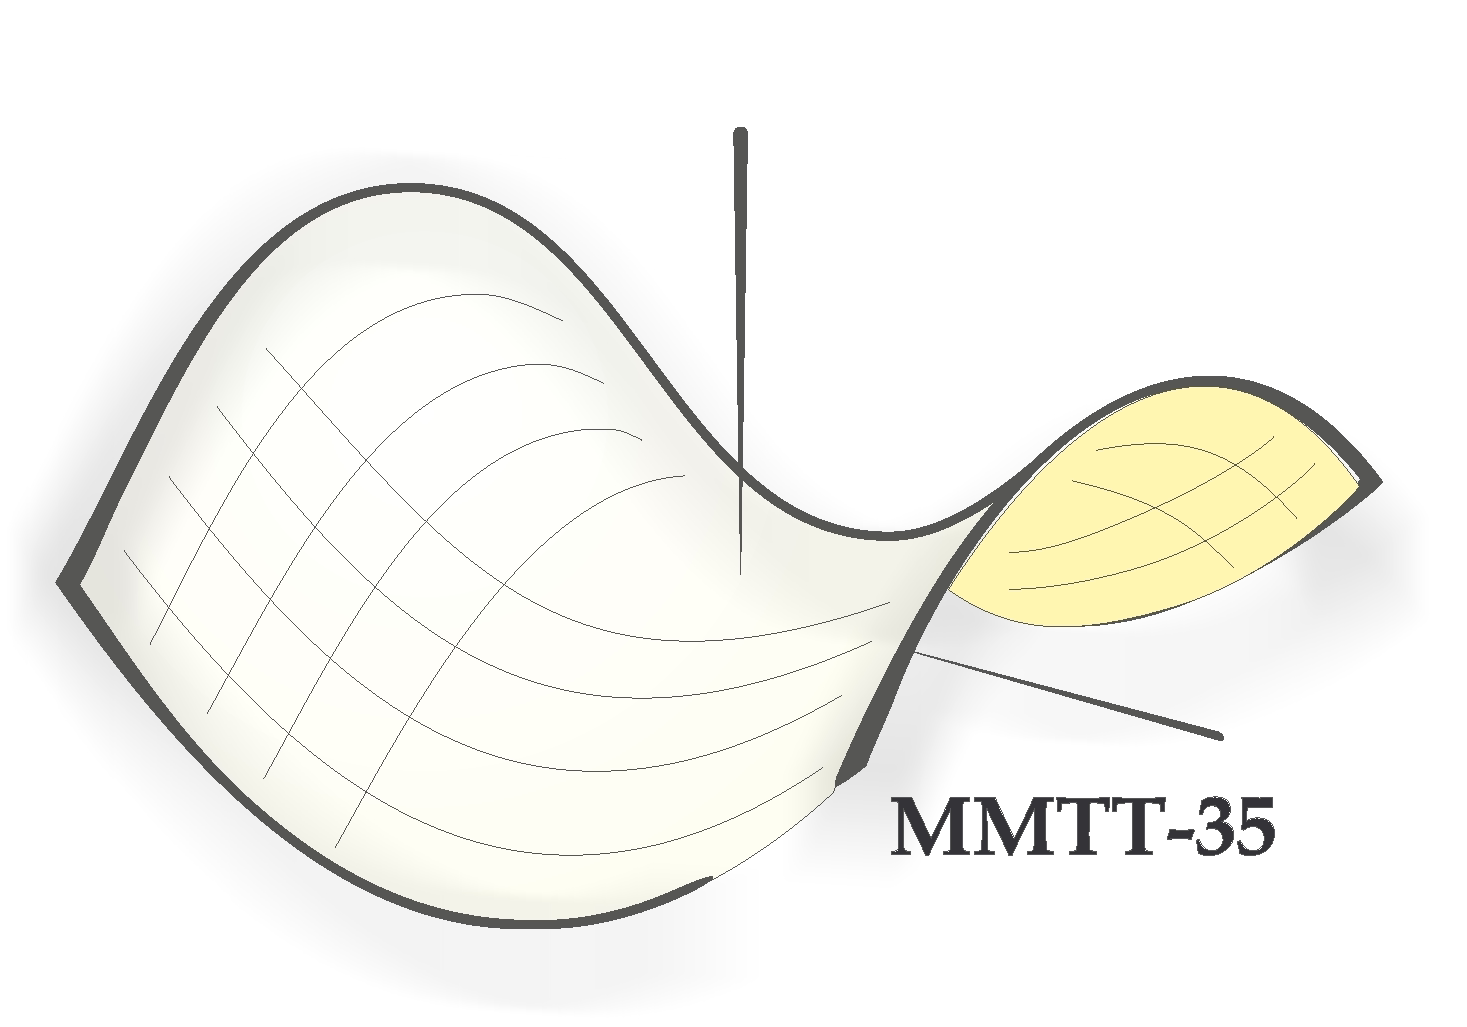                         XXXV International Scientific Conference MATHEMATICAL METHODS IN TECHNICS AND TECHNOLOGIES - MMTT-35 (eLibrary, DOI)
            